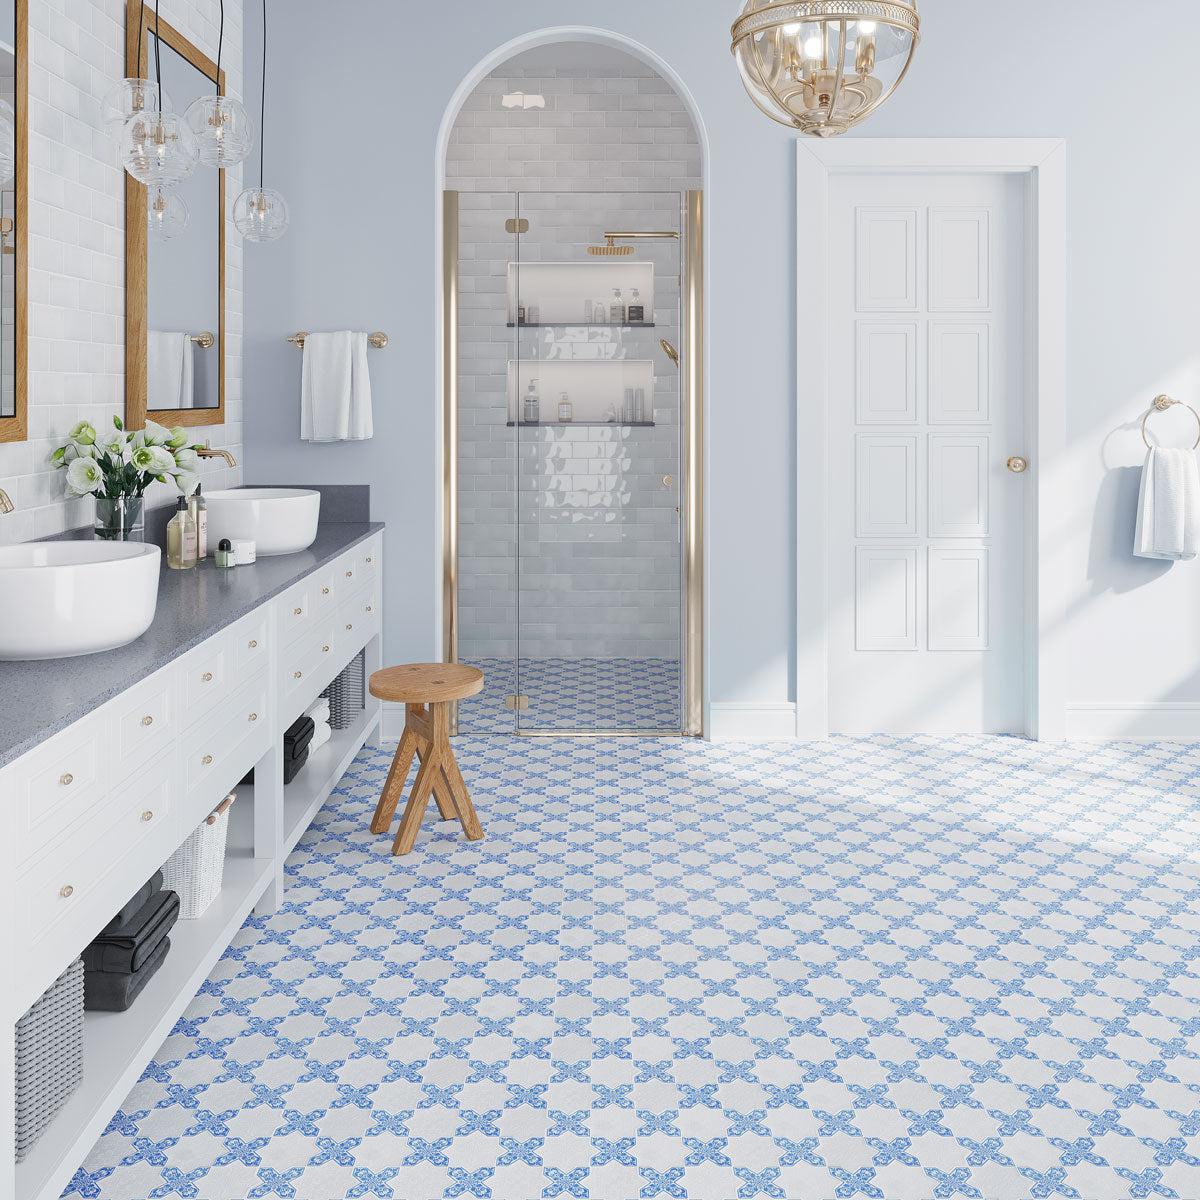 BLue and white patterned bathroom floor